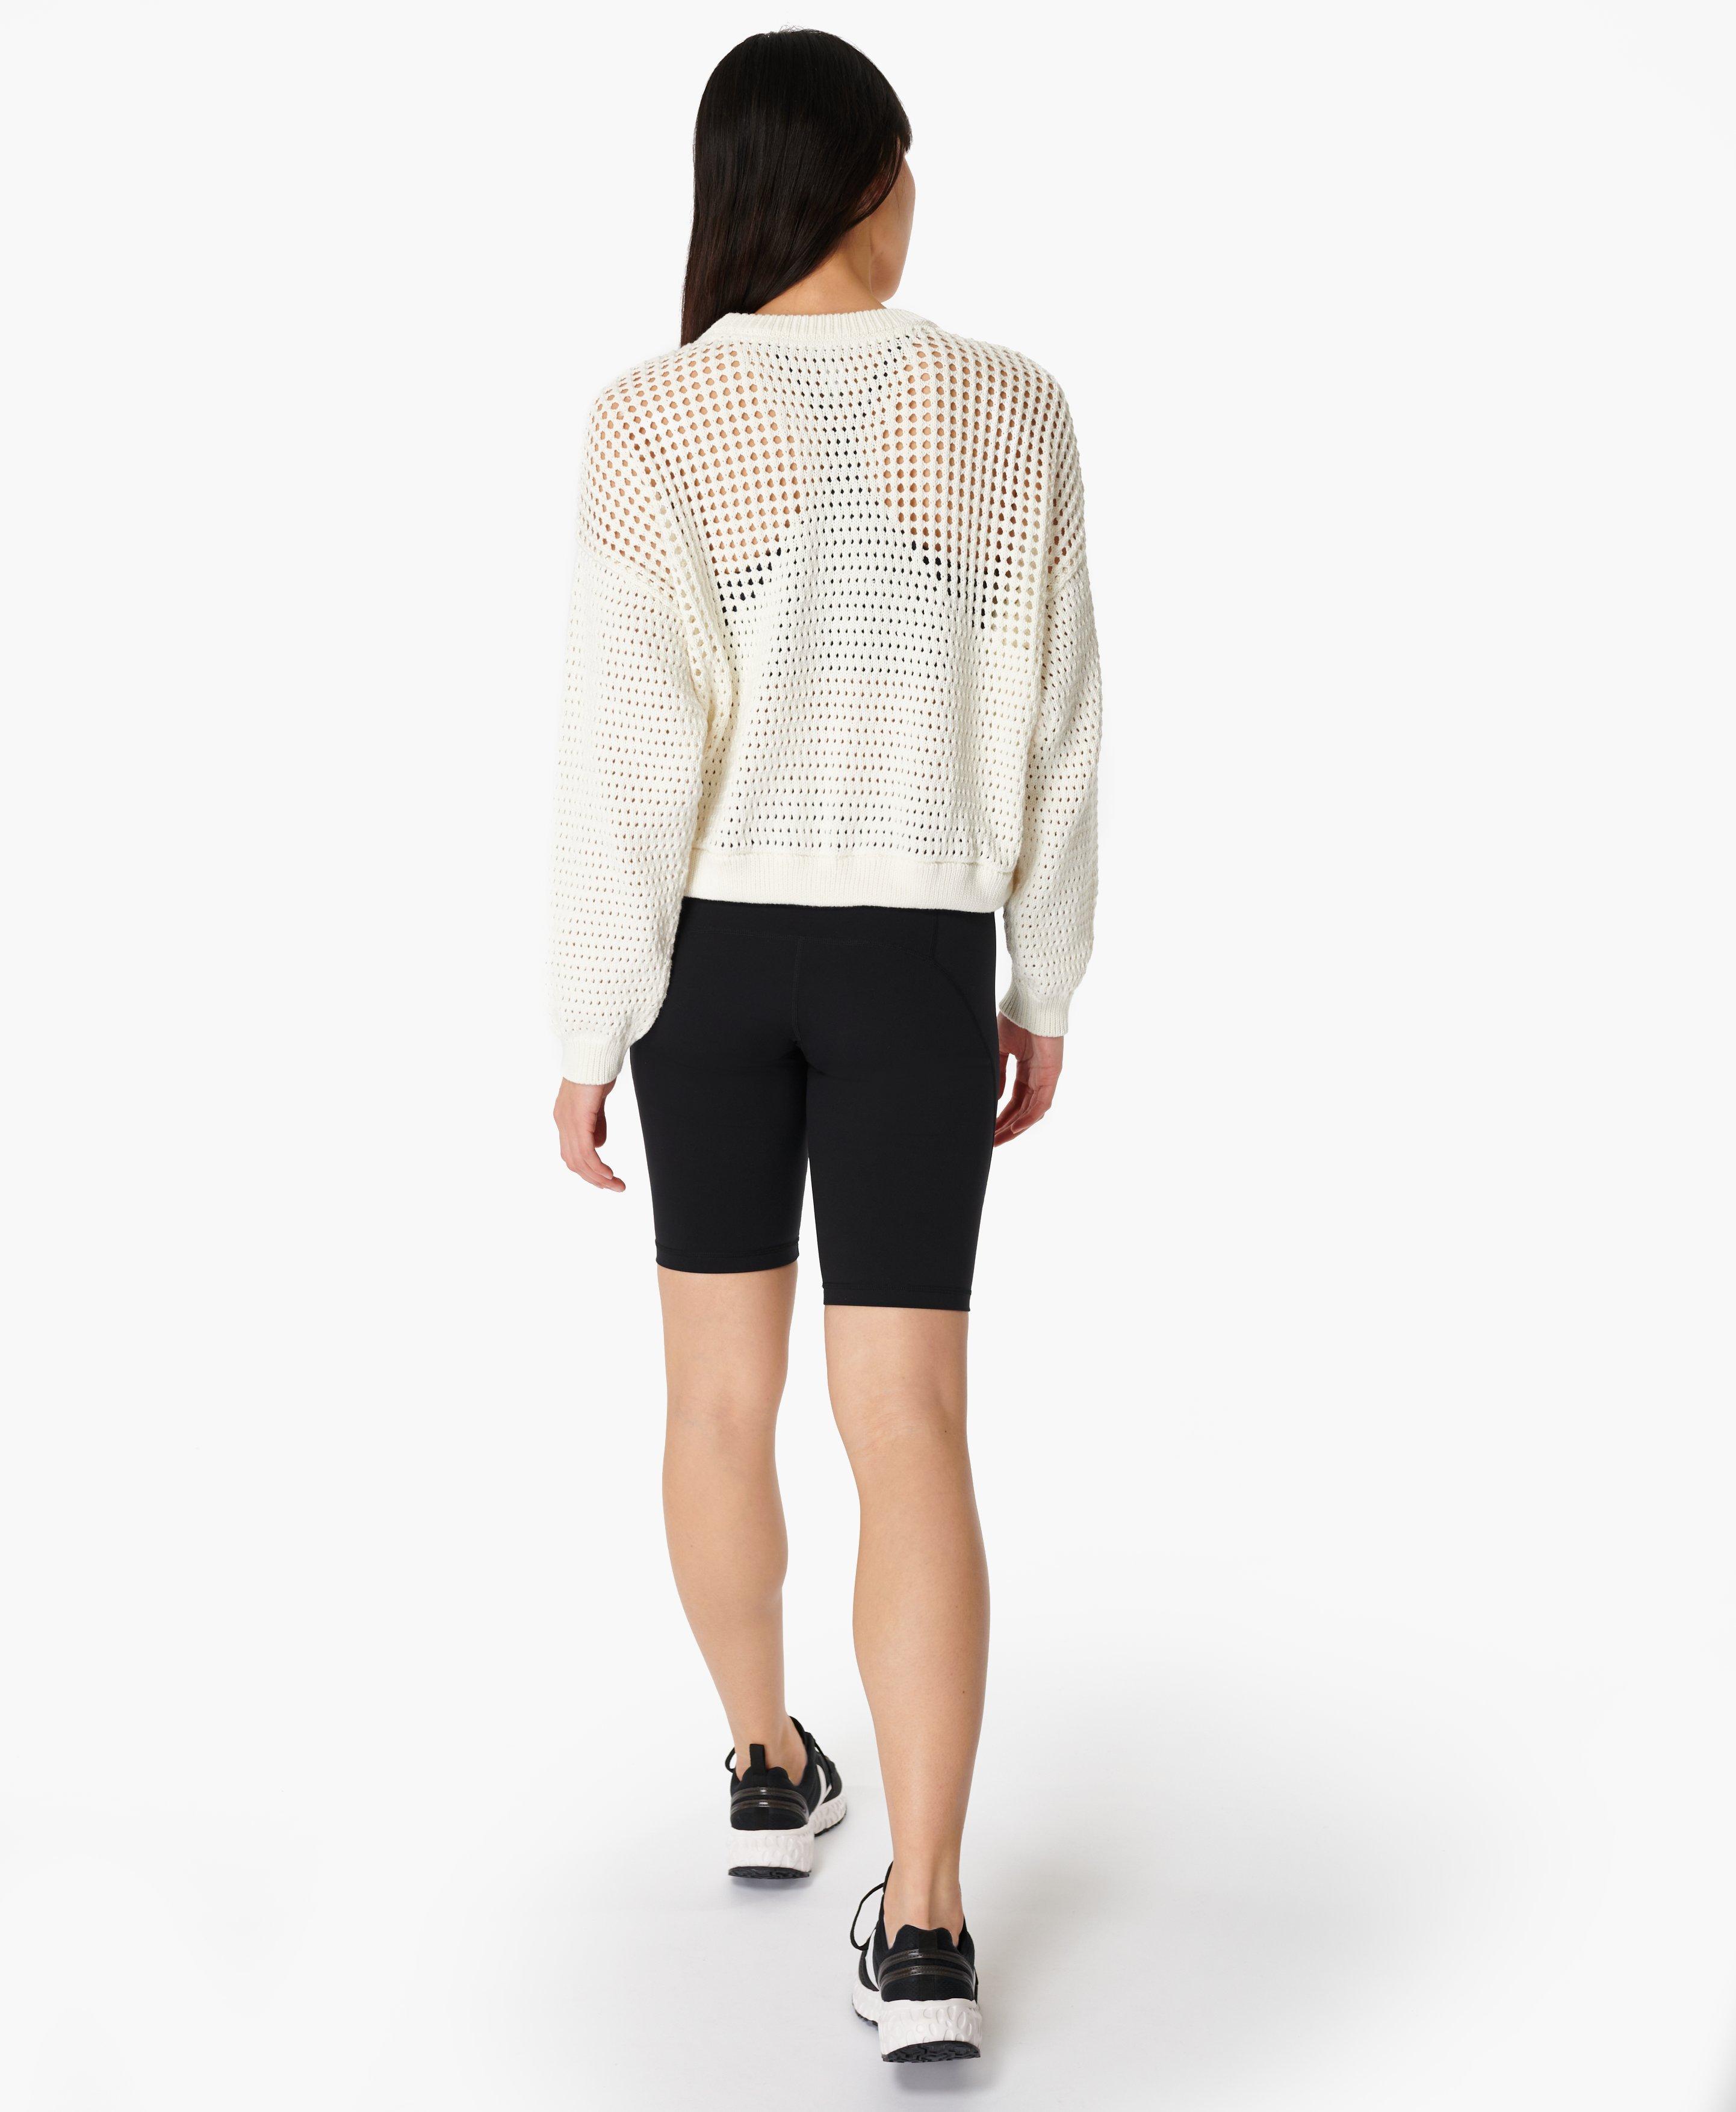 Tides High Open Weave Sweater- lilywhite | undefined | www